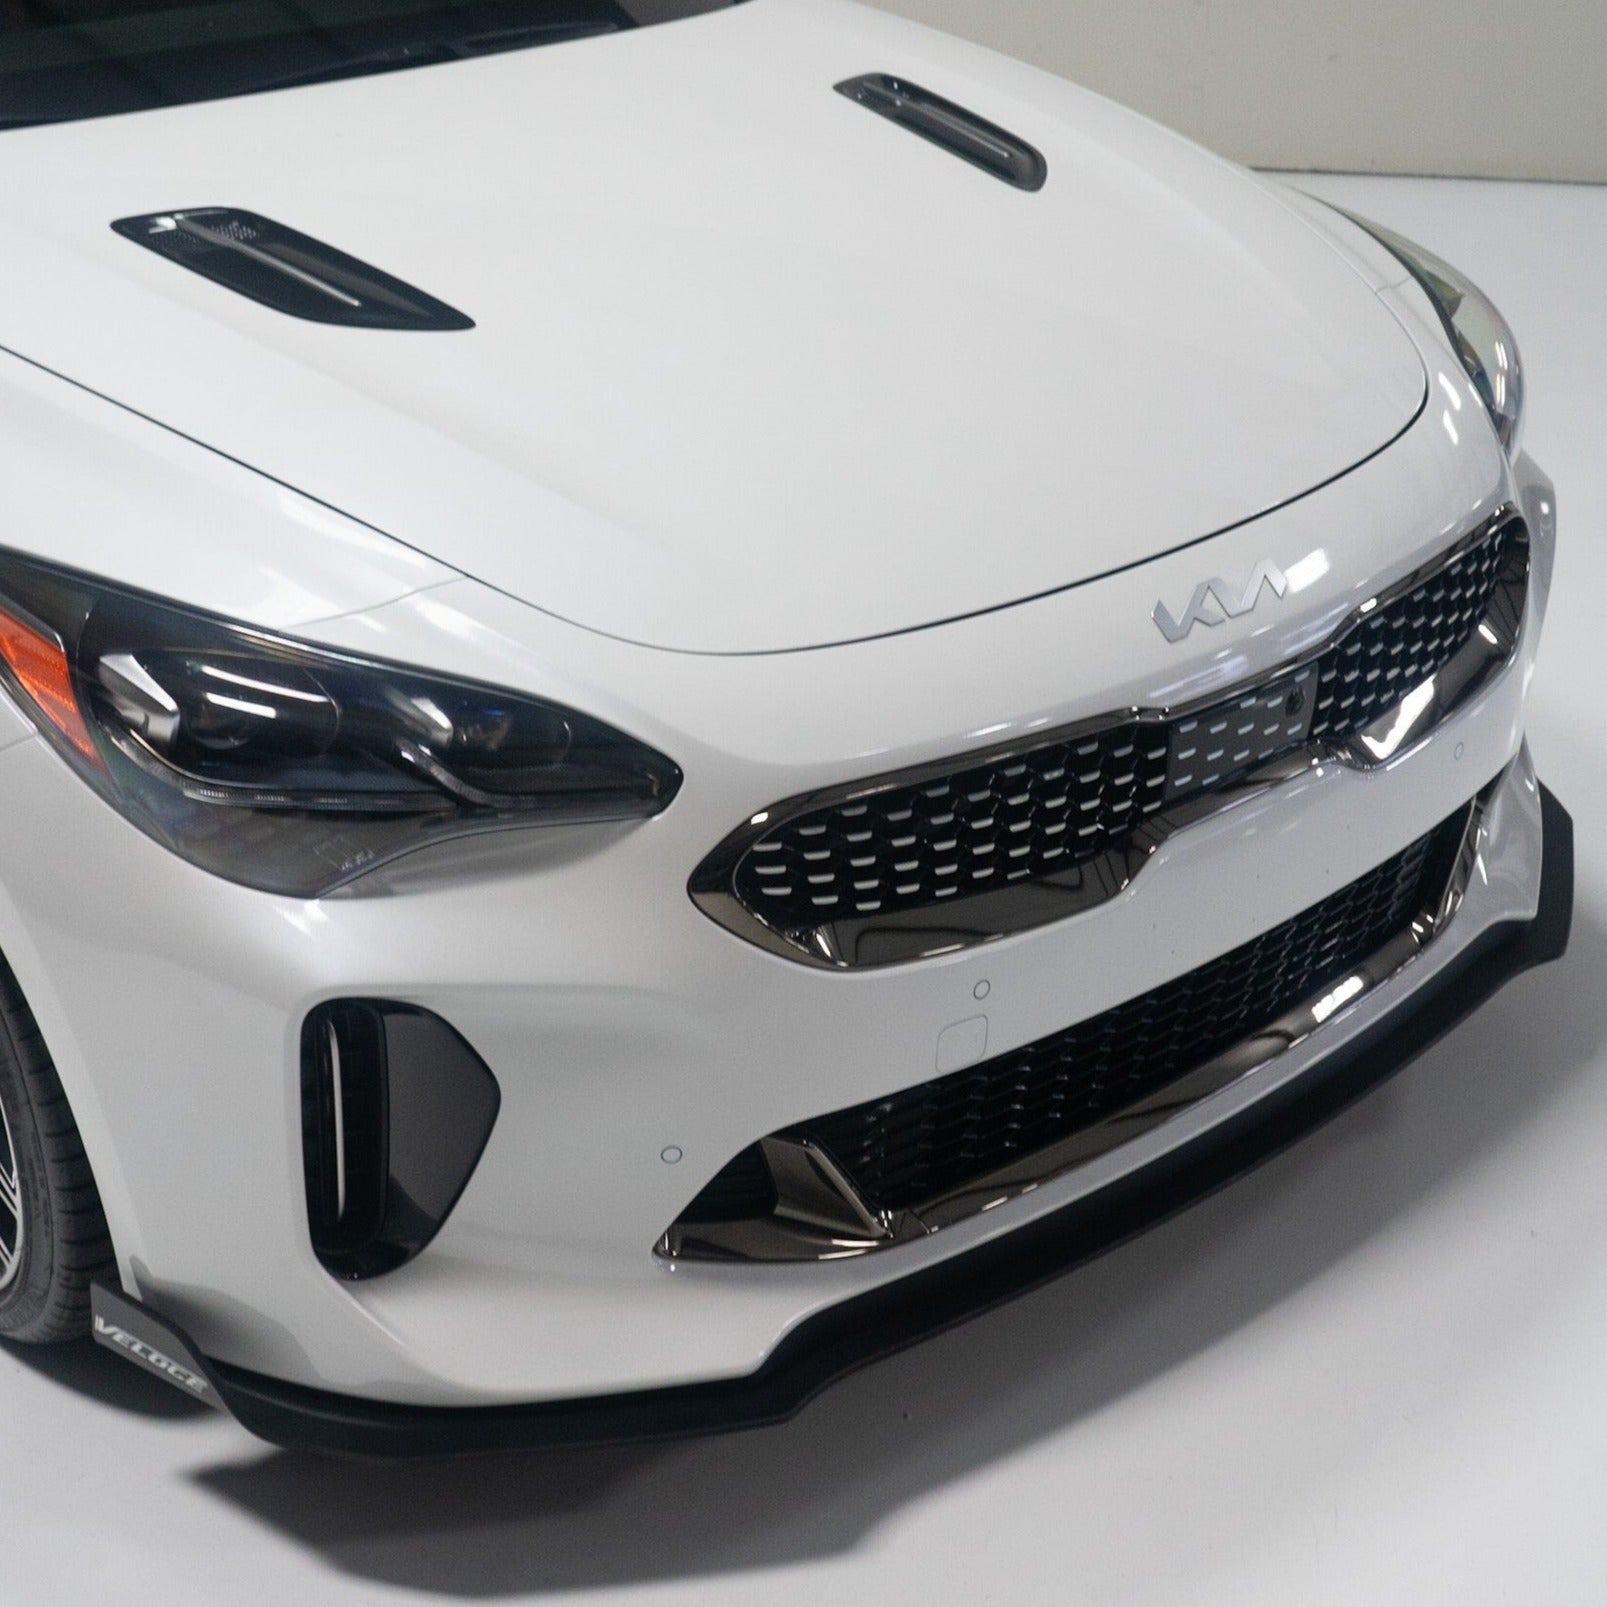 [KDMHolic Collection] VELOCE Front Wing Air Dam Splitter for Kia Stinger 2018-2023 GT & GT-Line Models